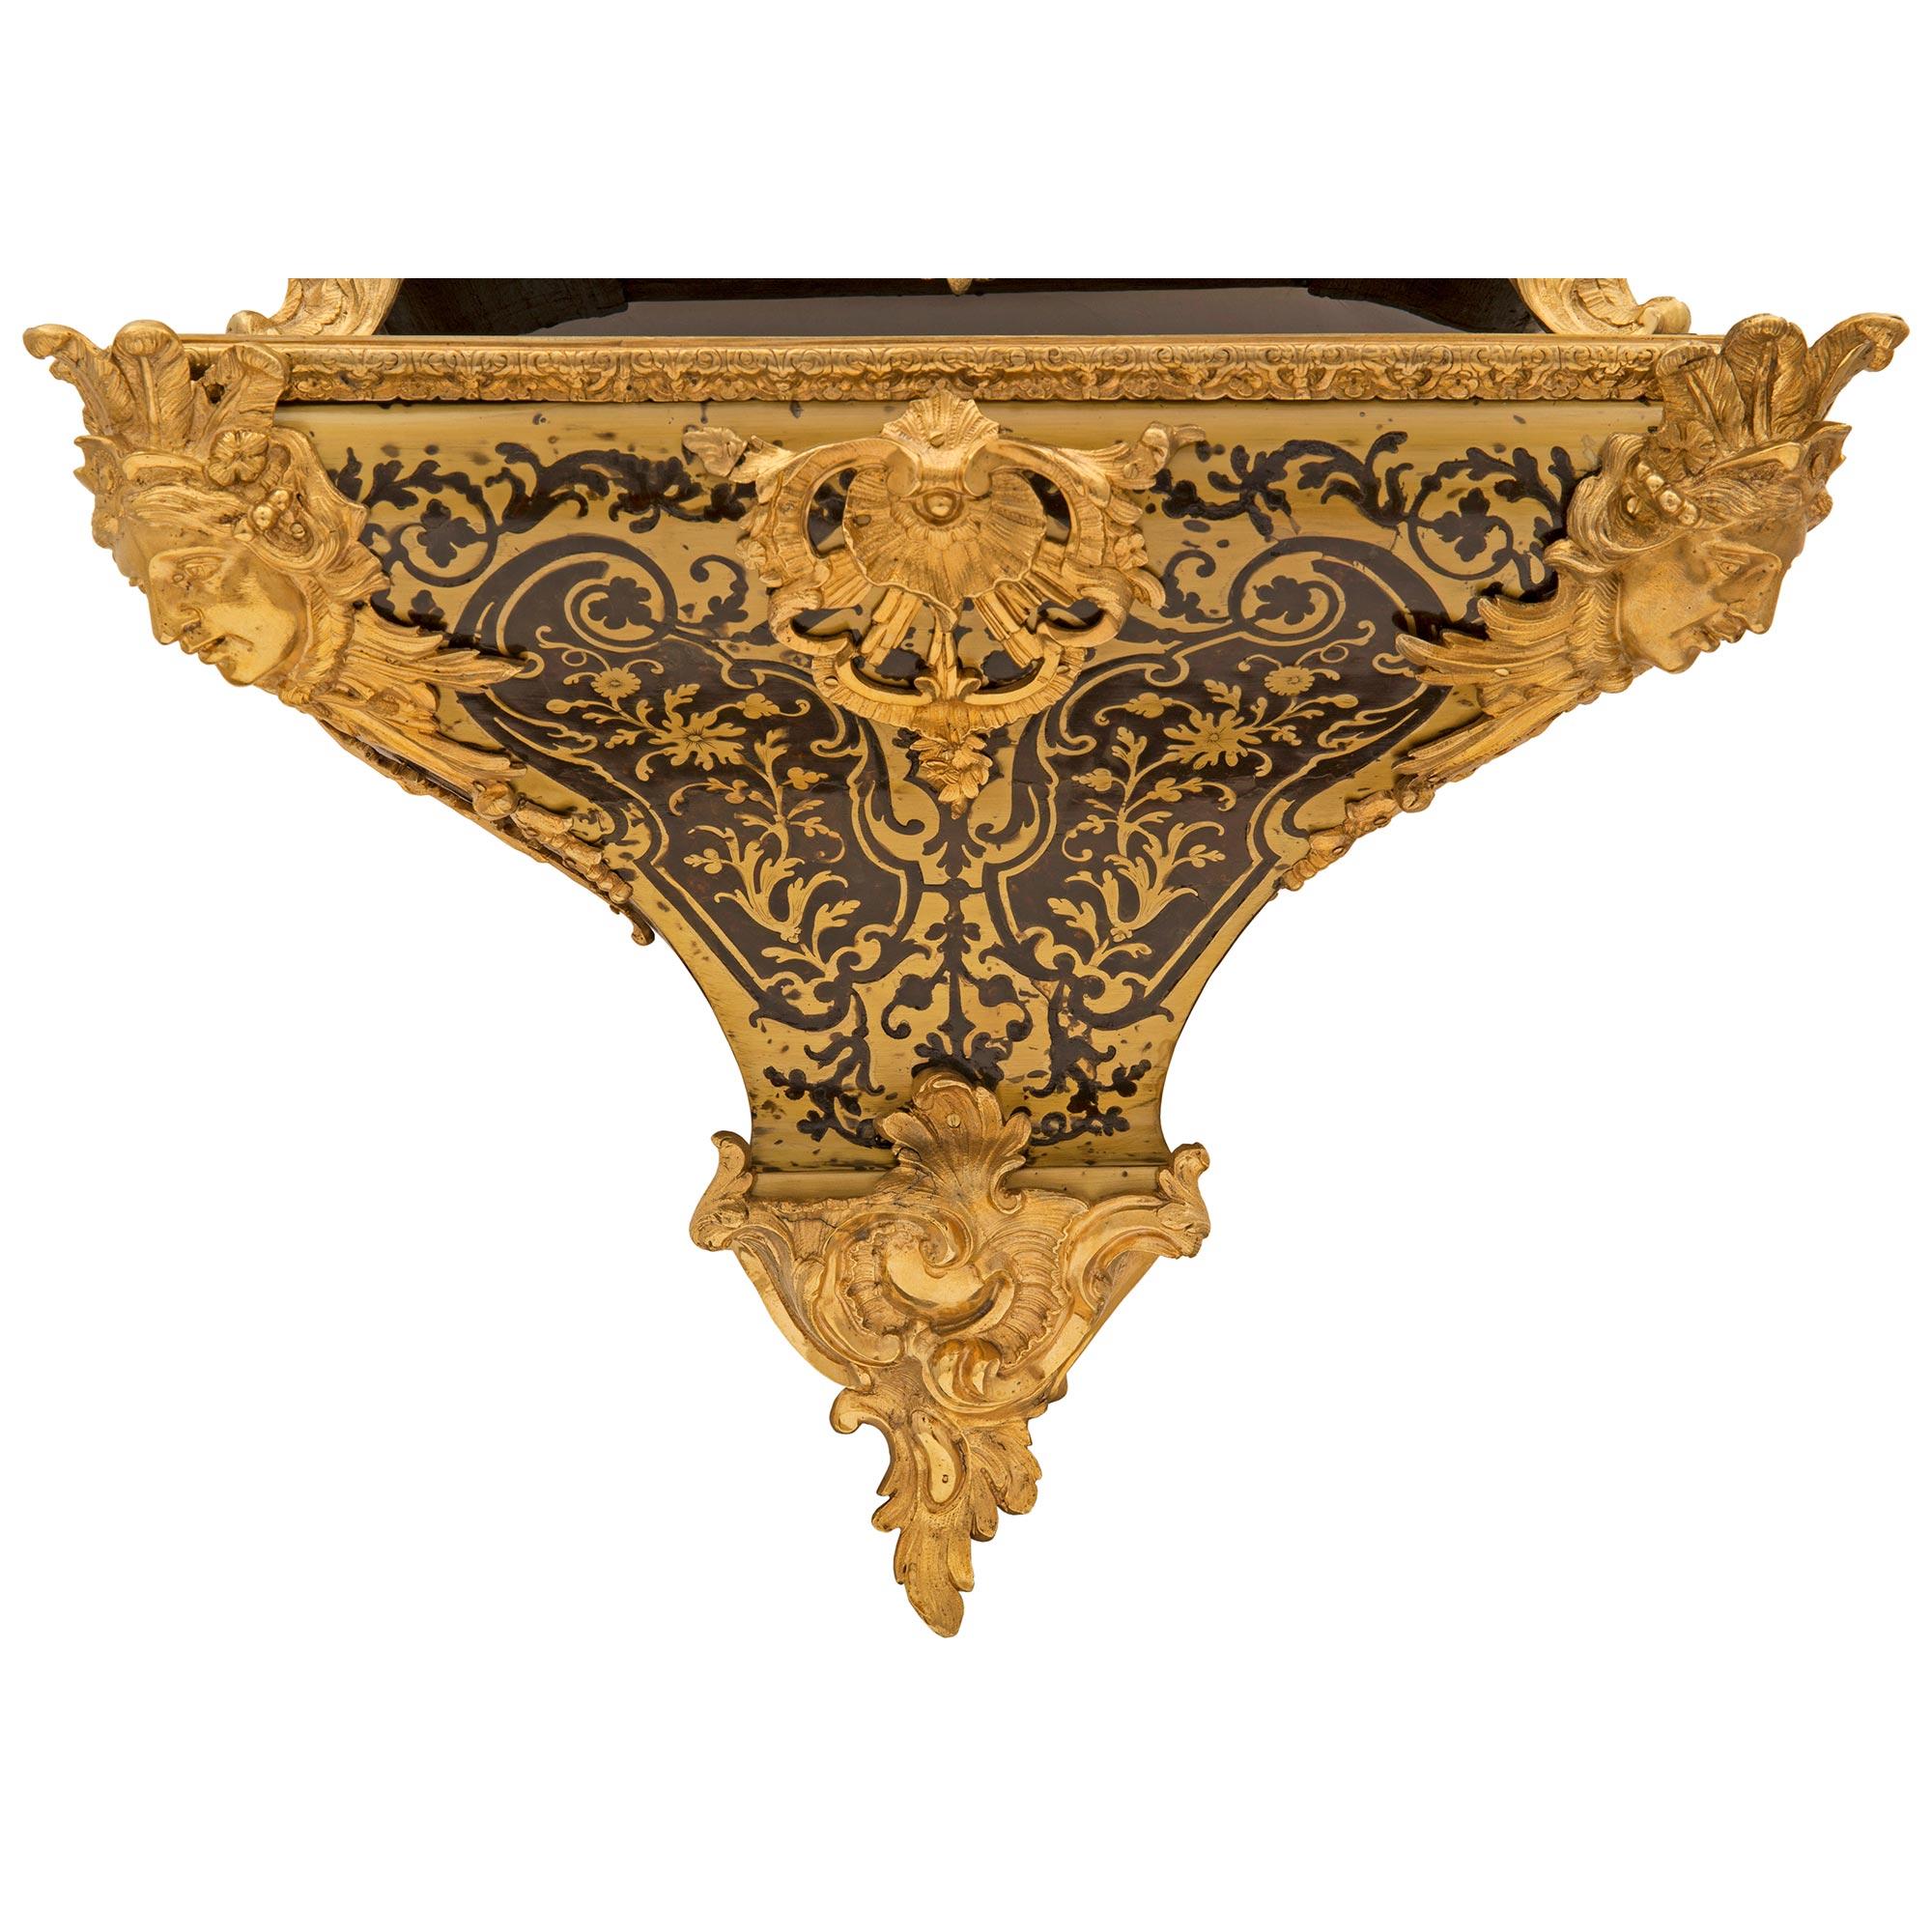 French 18th Century Louis XV Period Tortoiseshell and Ormolu Boulle Cartel Clock For Sale 3